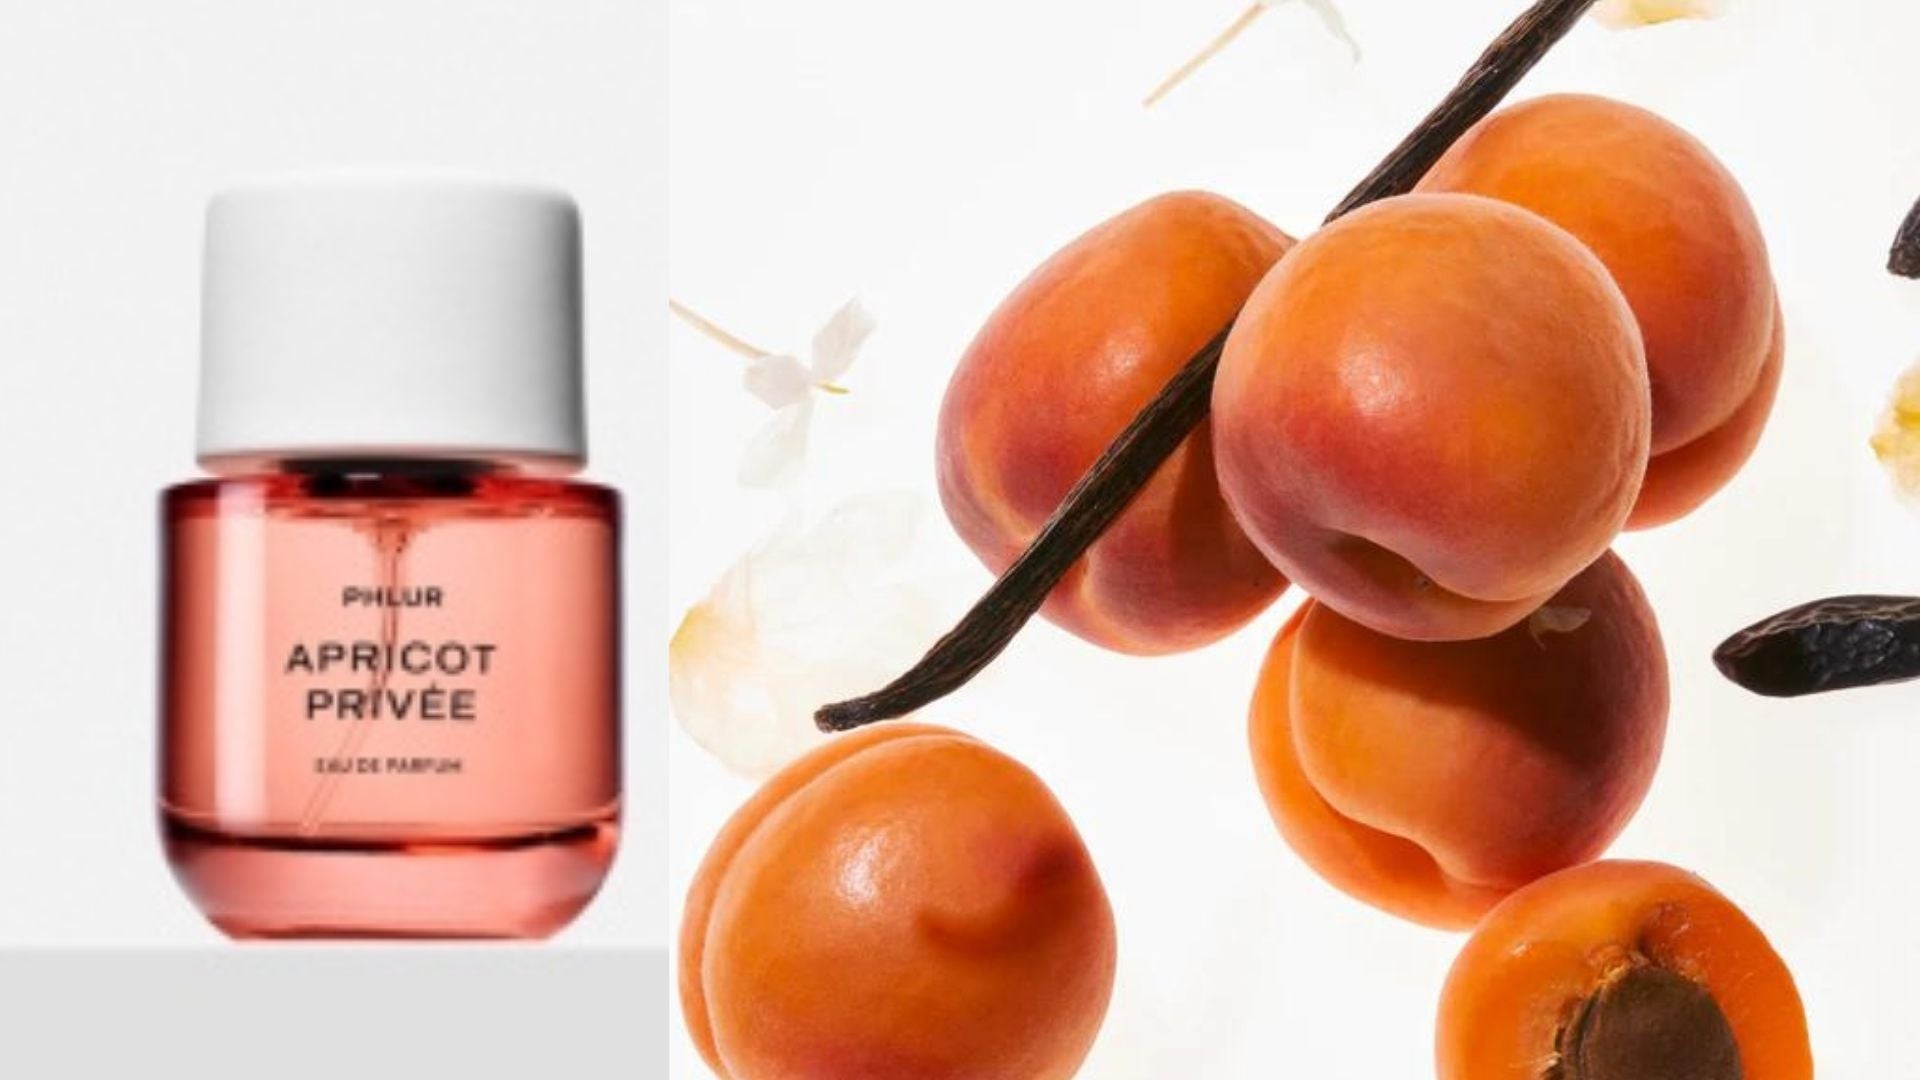 review, photos, ingredients, trends, 2022, 2023, phlur, apricot privee, best new summer fragrances, best summer perfumes, sephora, apricot, plum, cardamom